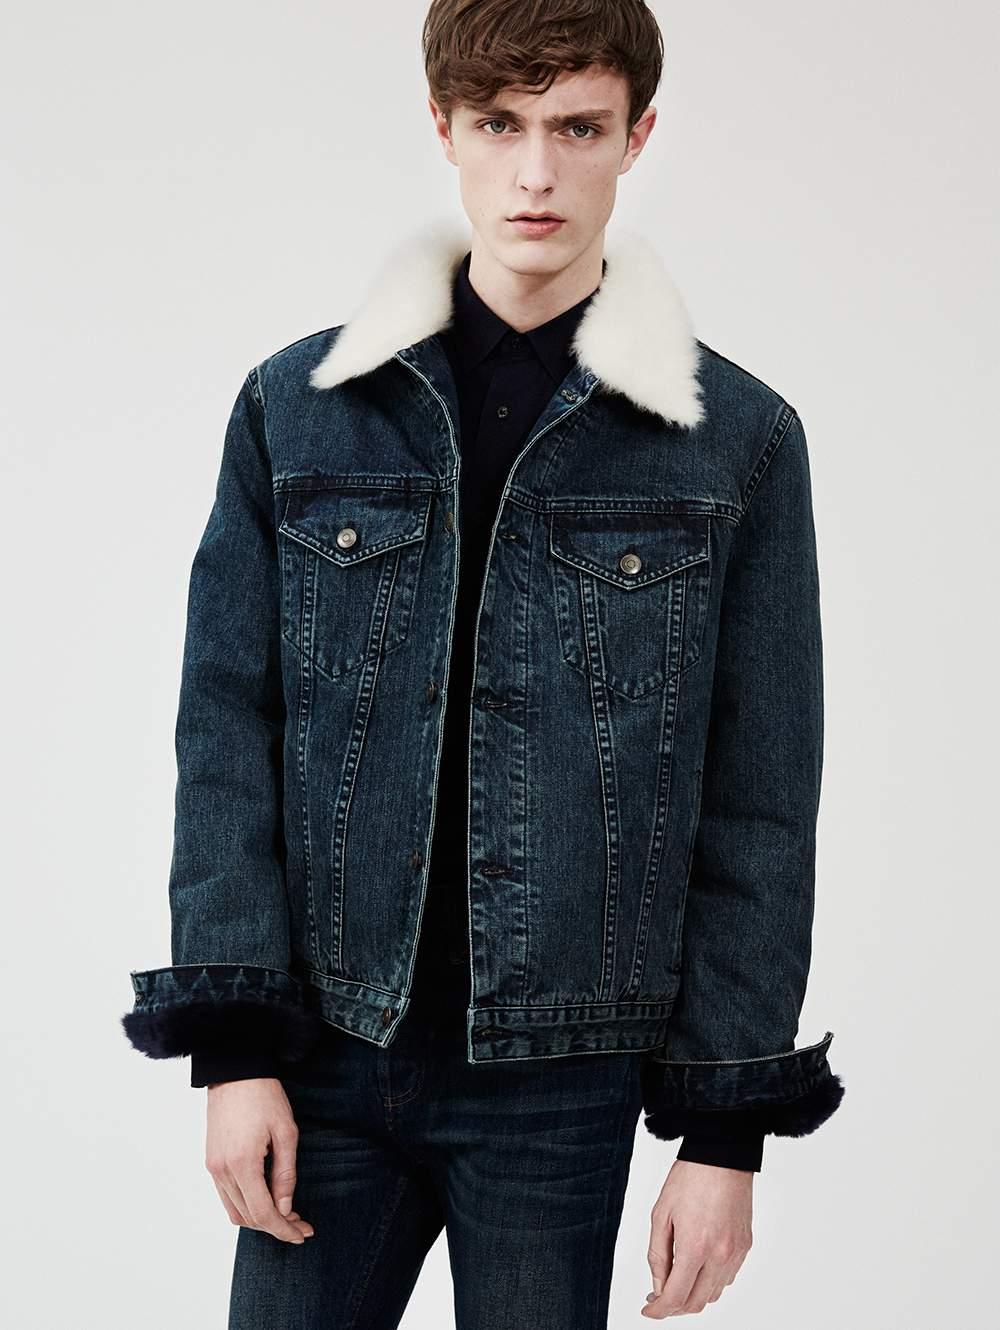 ! Yves Salomon Homme! By inventing knitted and stretch fur, Yves Salomon brings lightness to clothes and new materials, such as beaver fur, allowing more affordable prices.